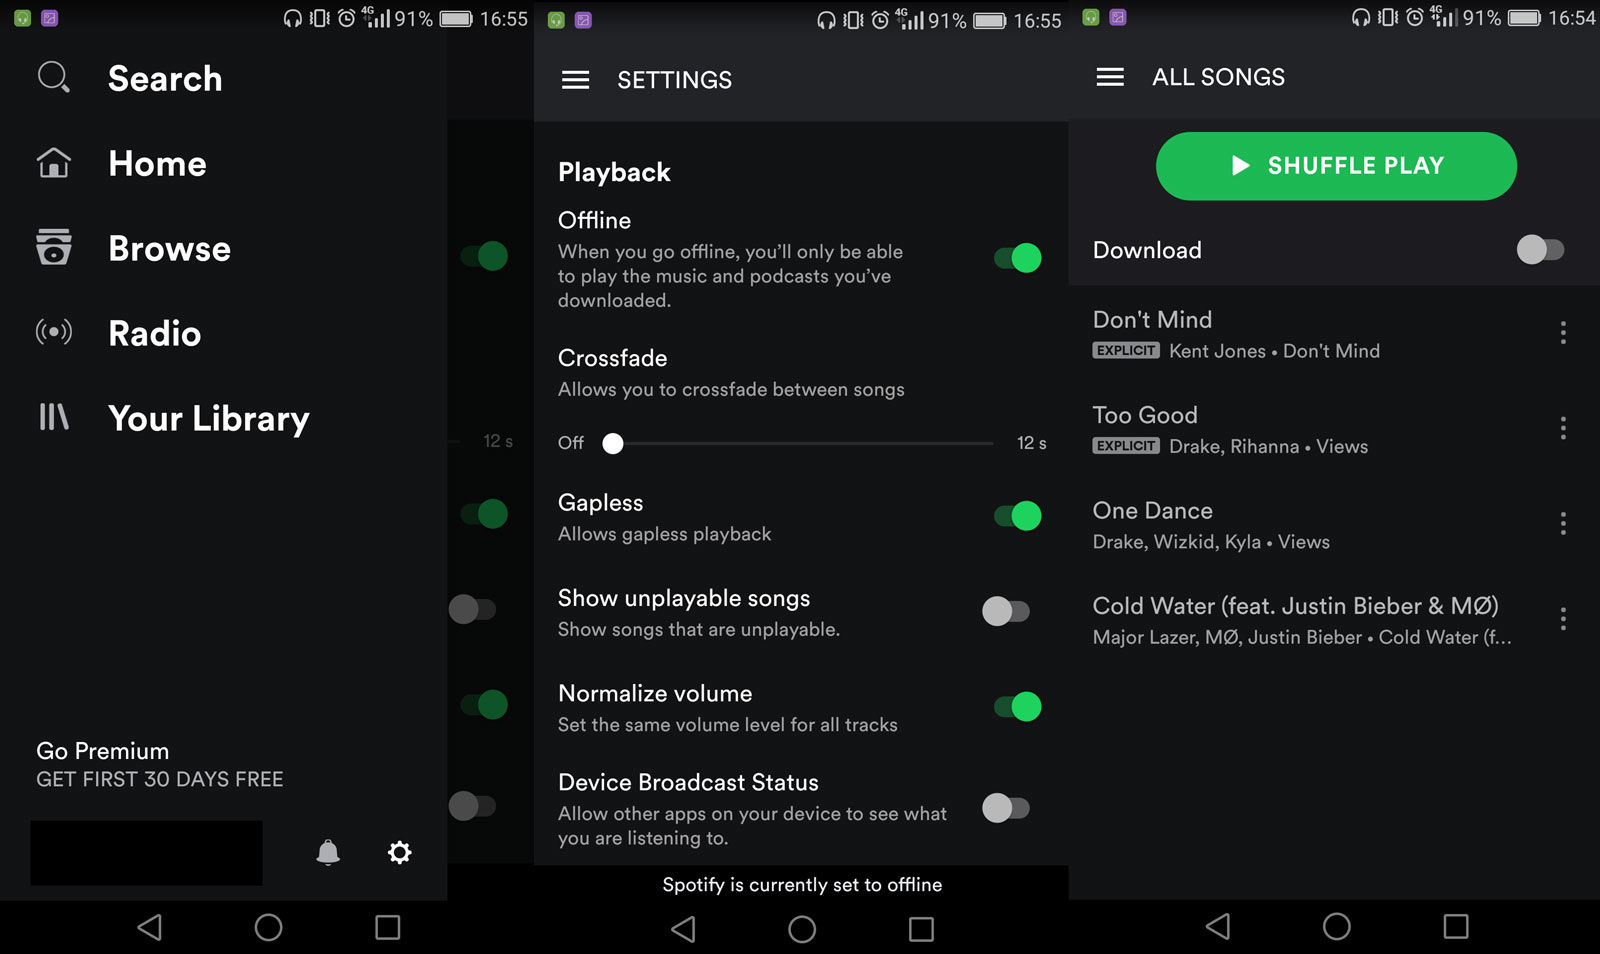 How to download music from spotify using android phone